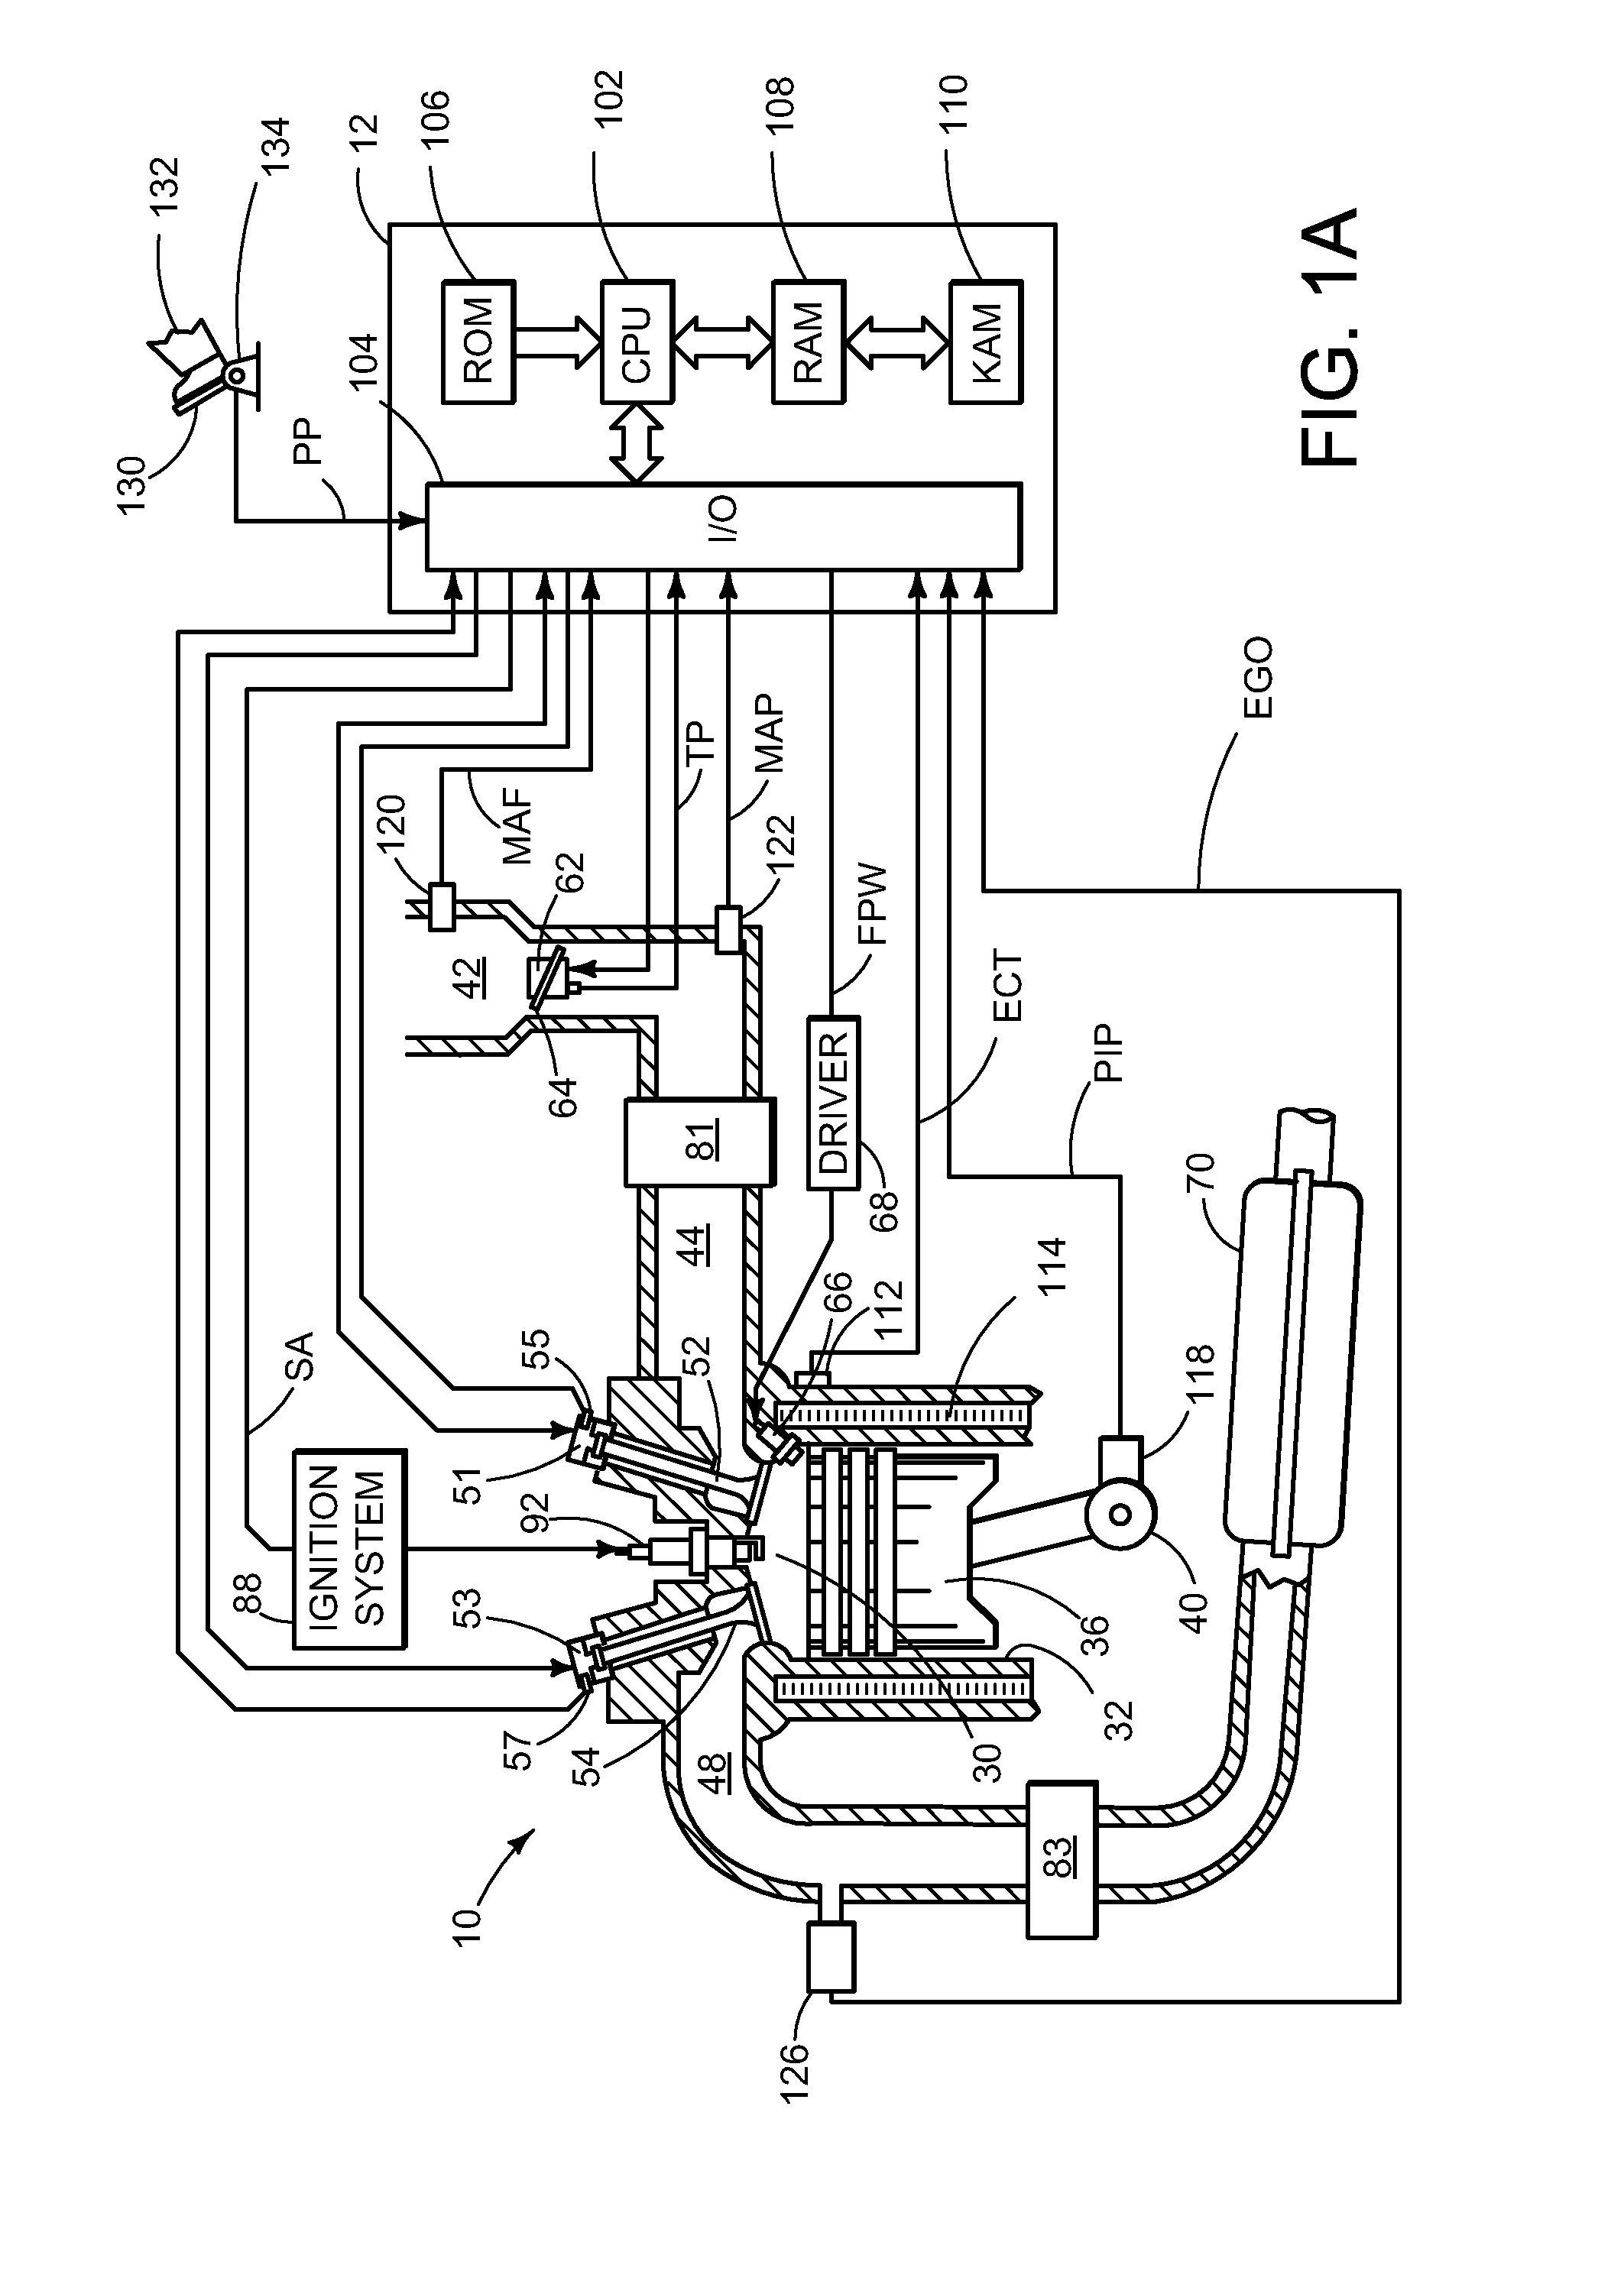 Differential torque operation for internal combustion engine